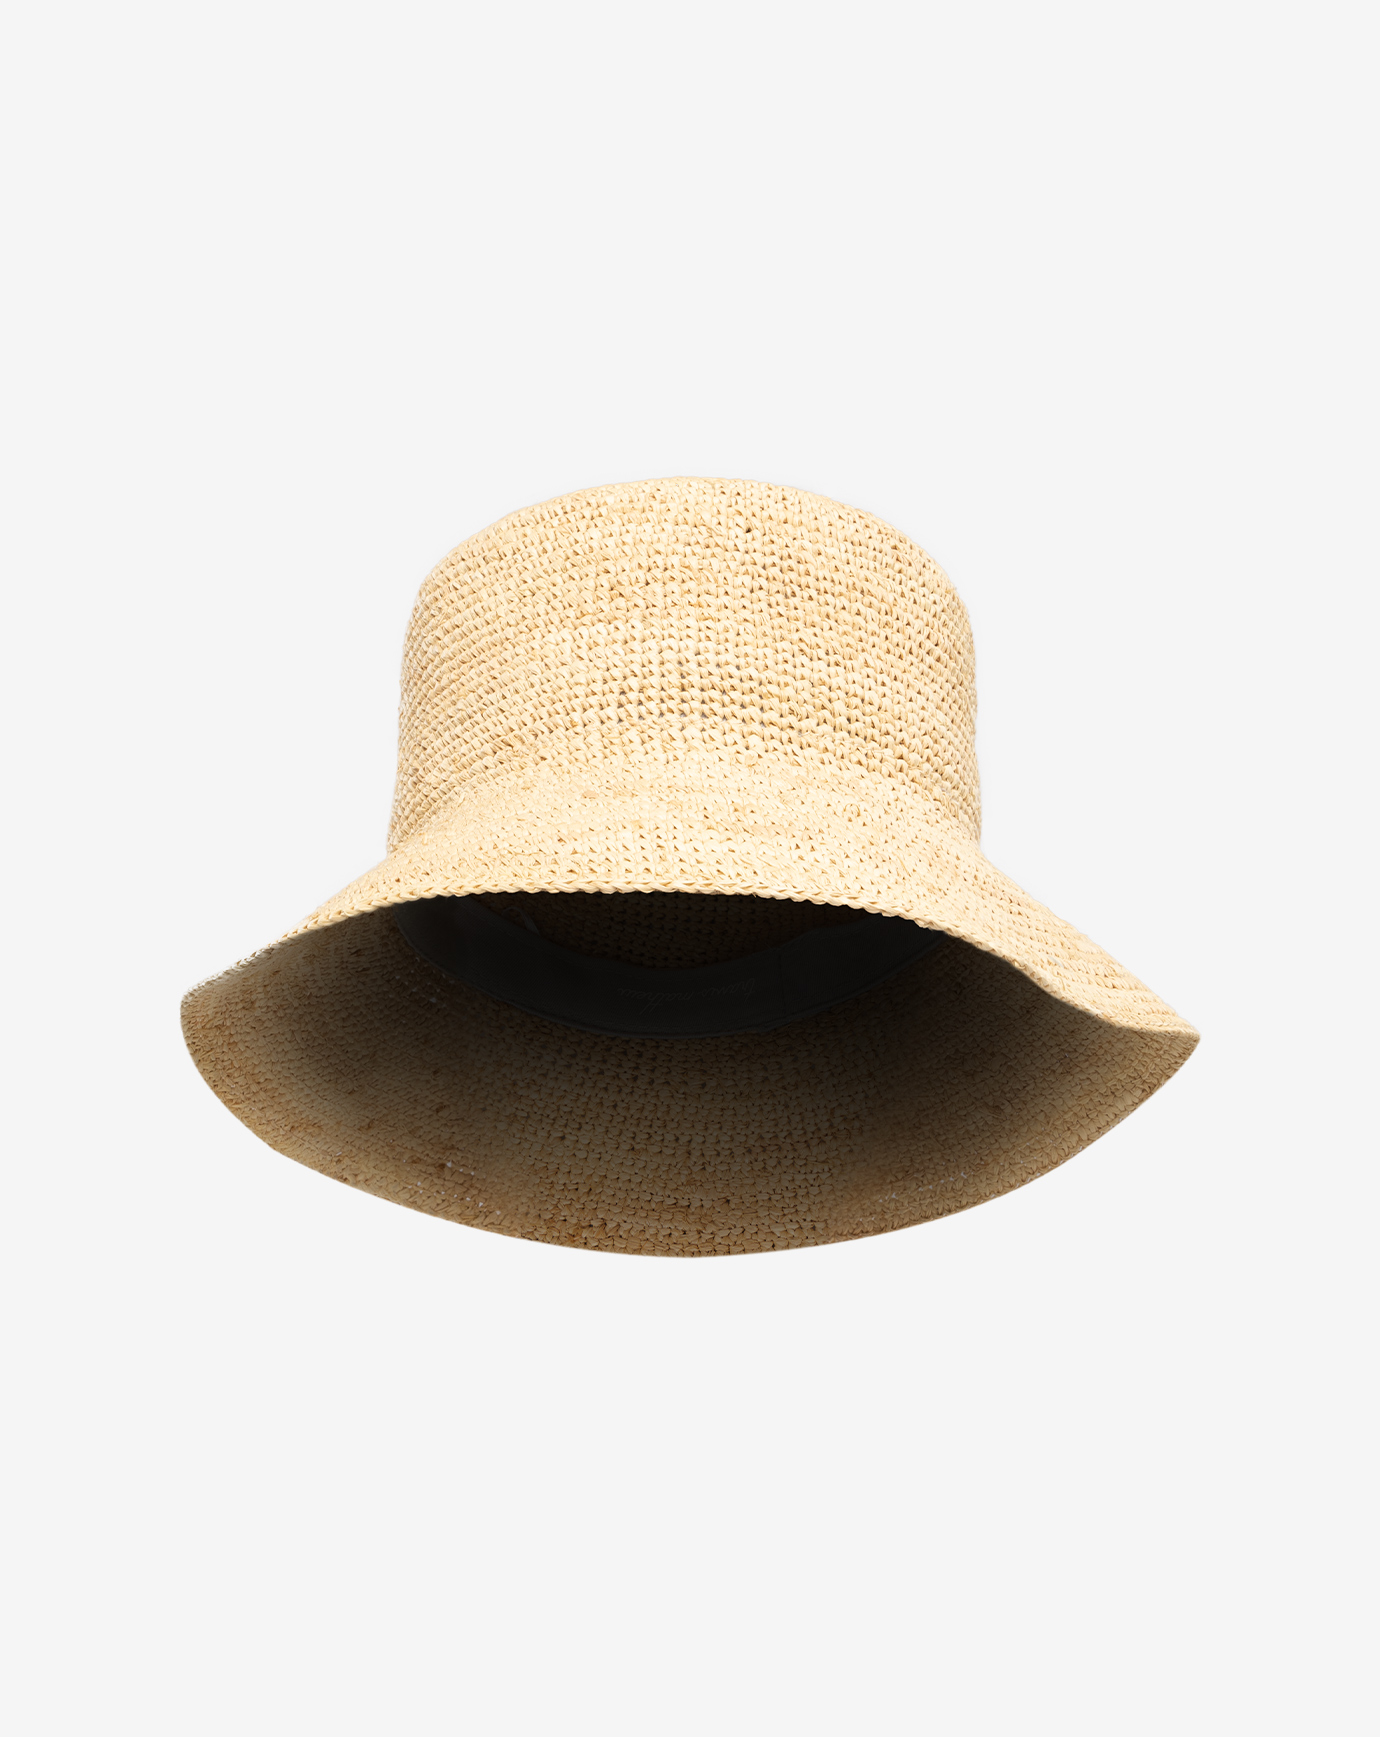 SUMMER VACATION WOVEN HAT 1